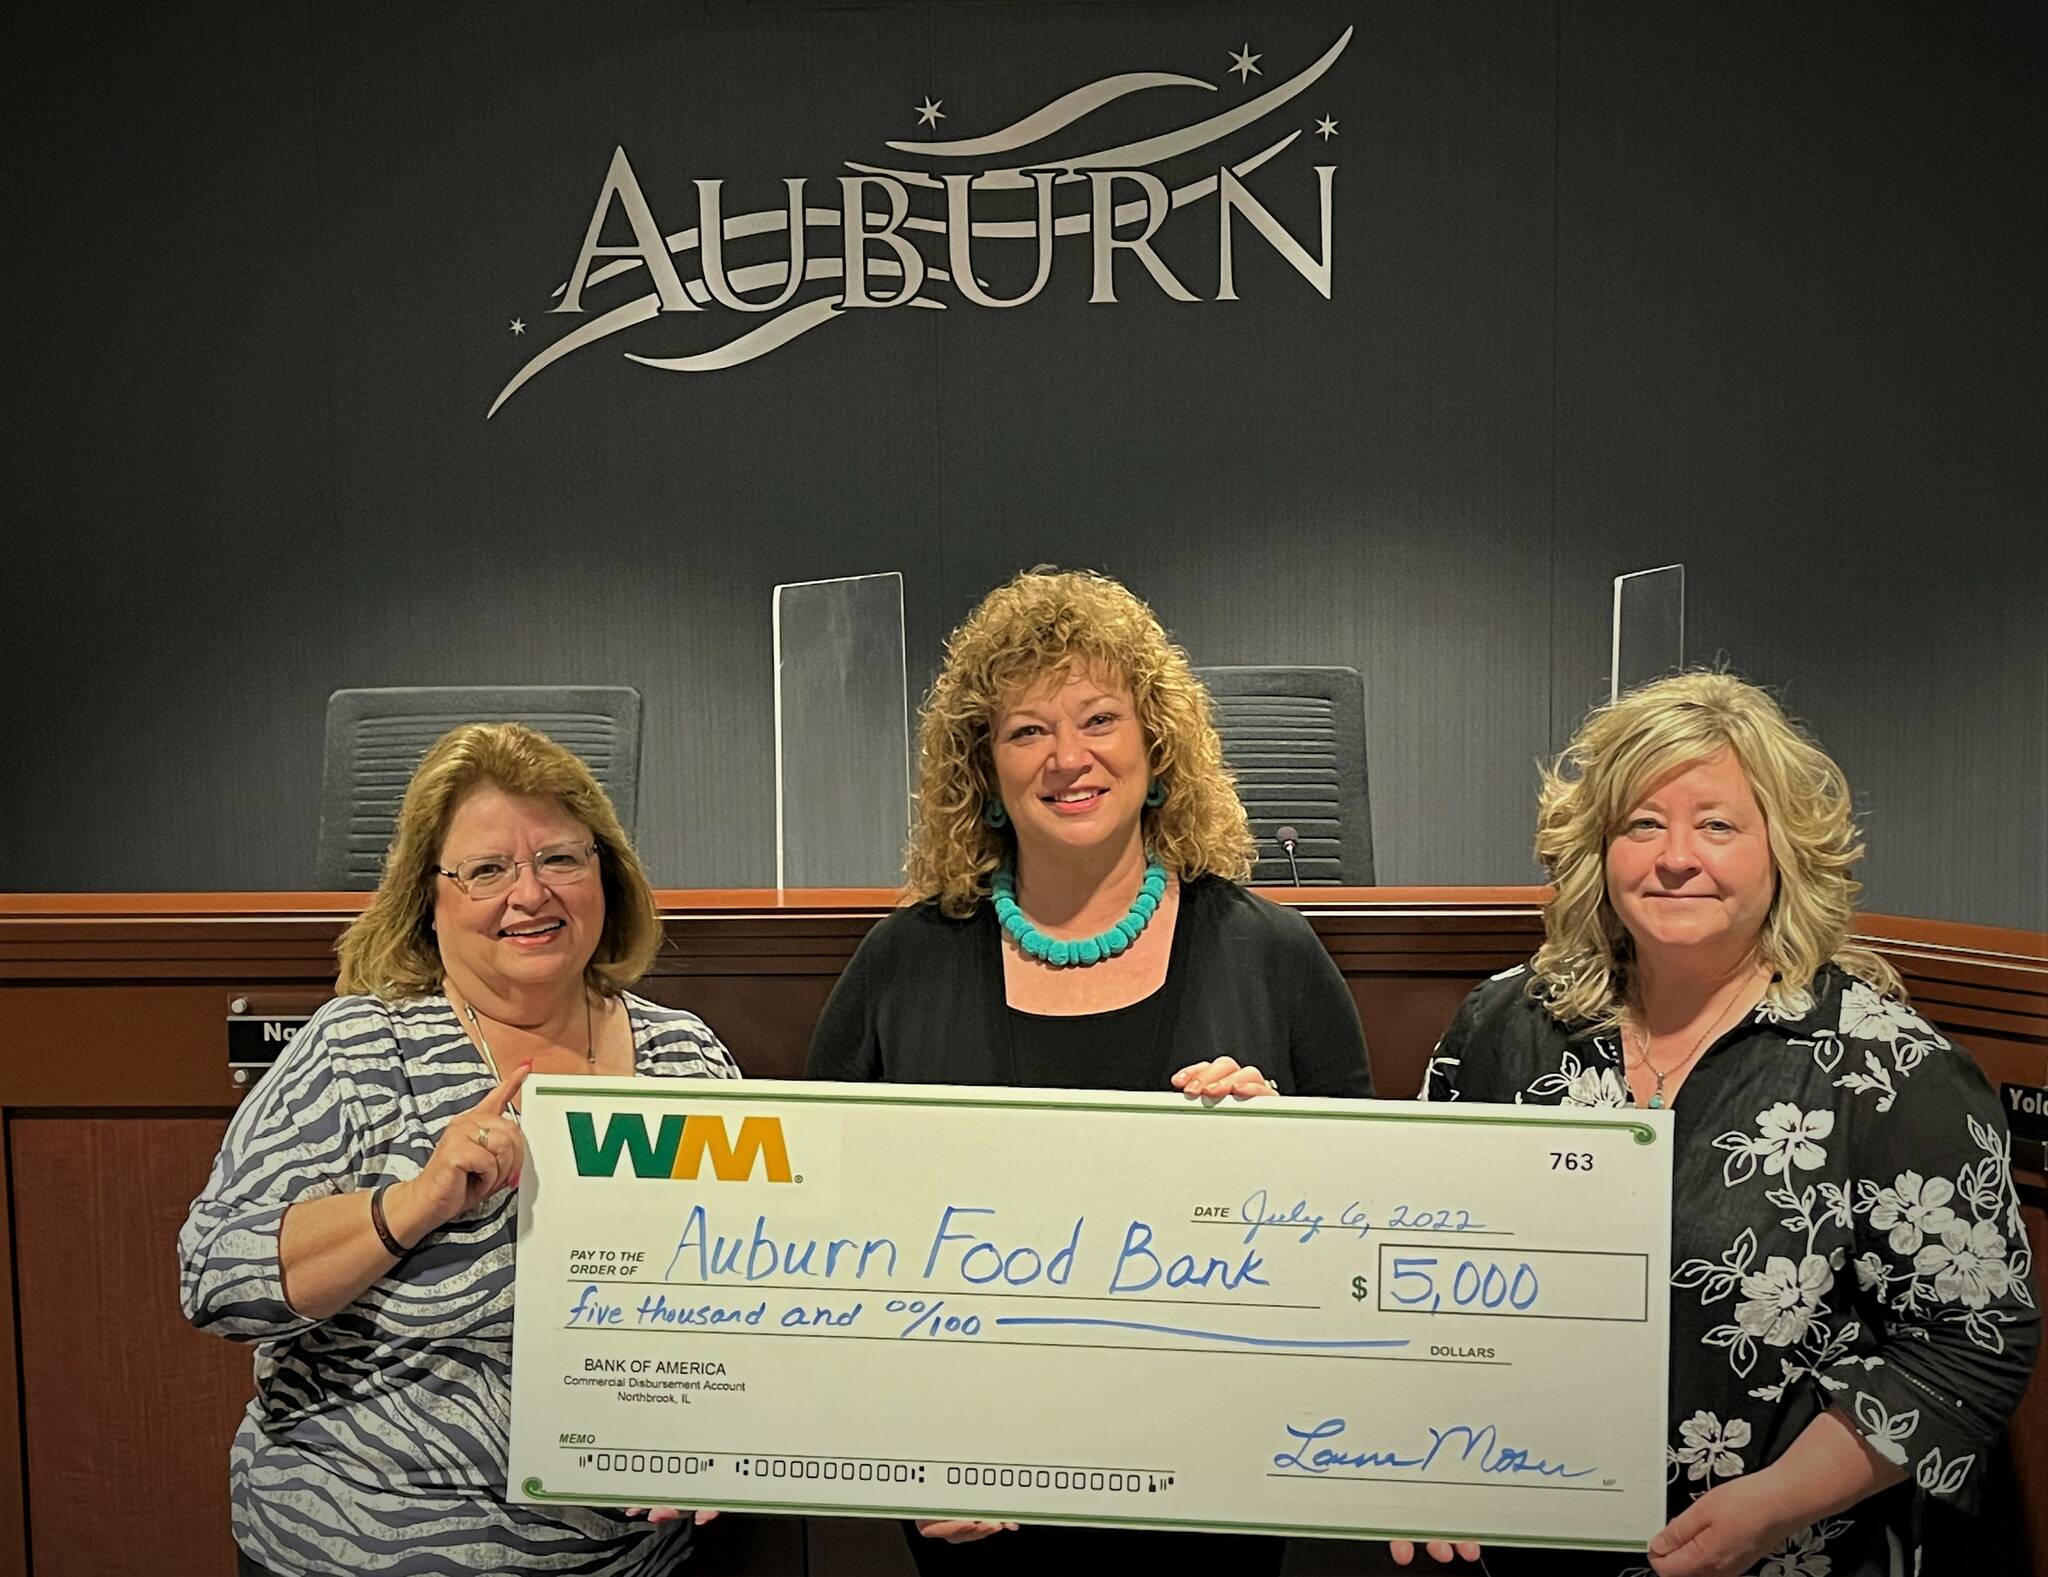 Photo courtesy of Waste Management
(Left to right) Debbie Christian of the Auburn Food Bank, Auburn Mayor Nancy Backus and Laura Moser from Waste Management pose for a photo with the $5,000 check WM donated to the Auburn Food Bank.